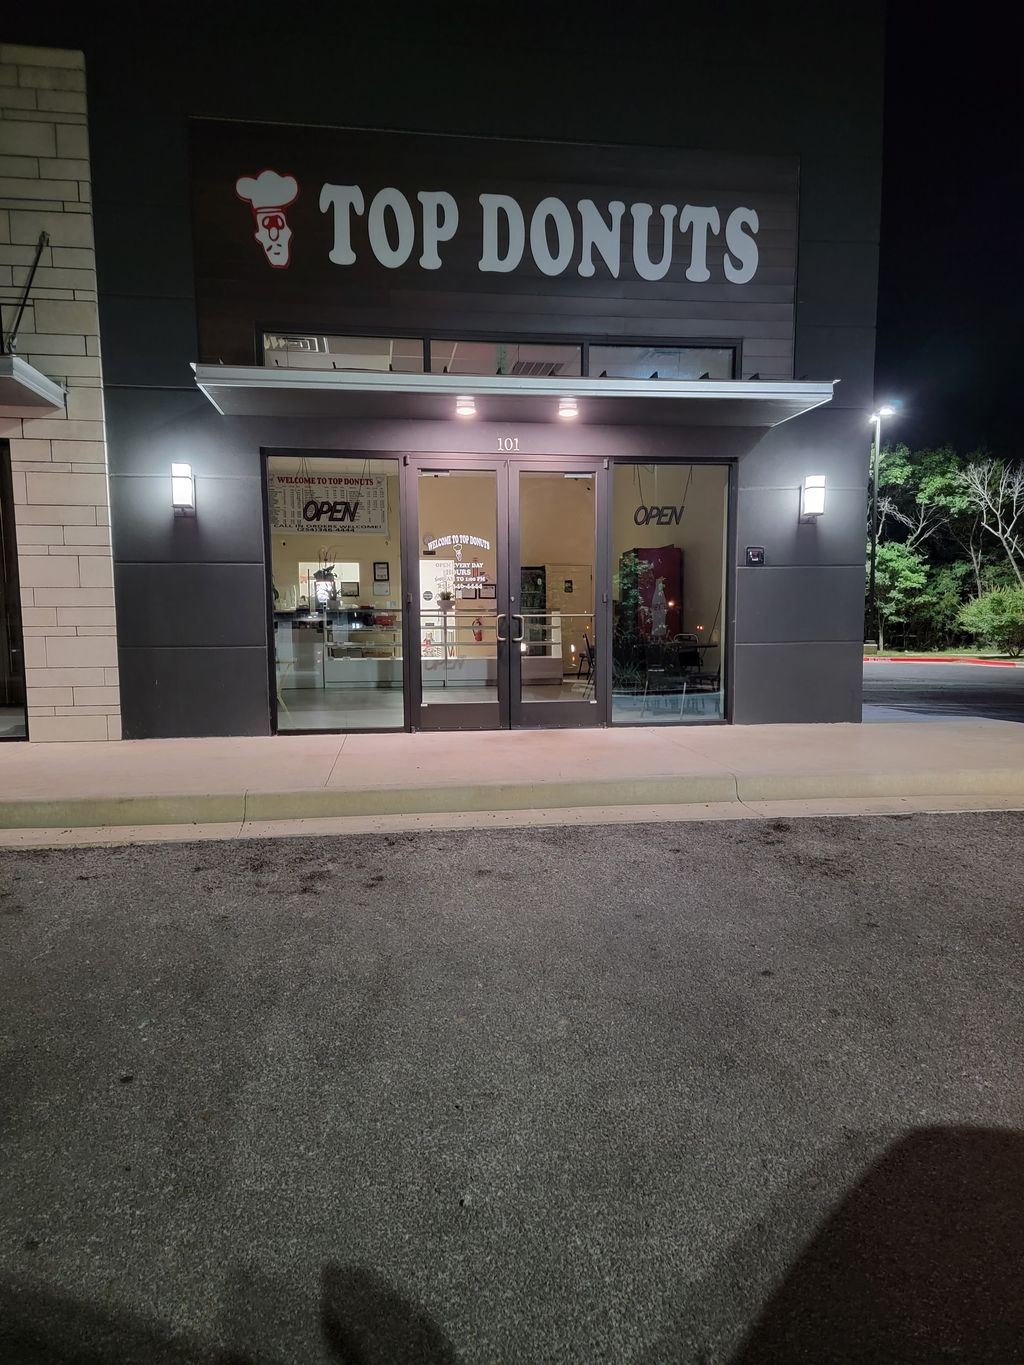 Top Donuts